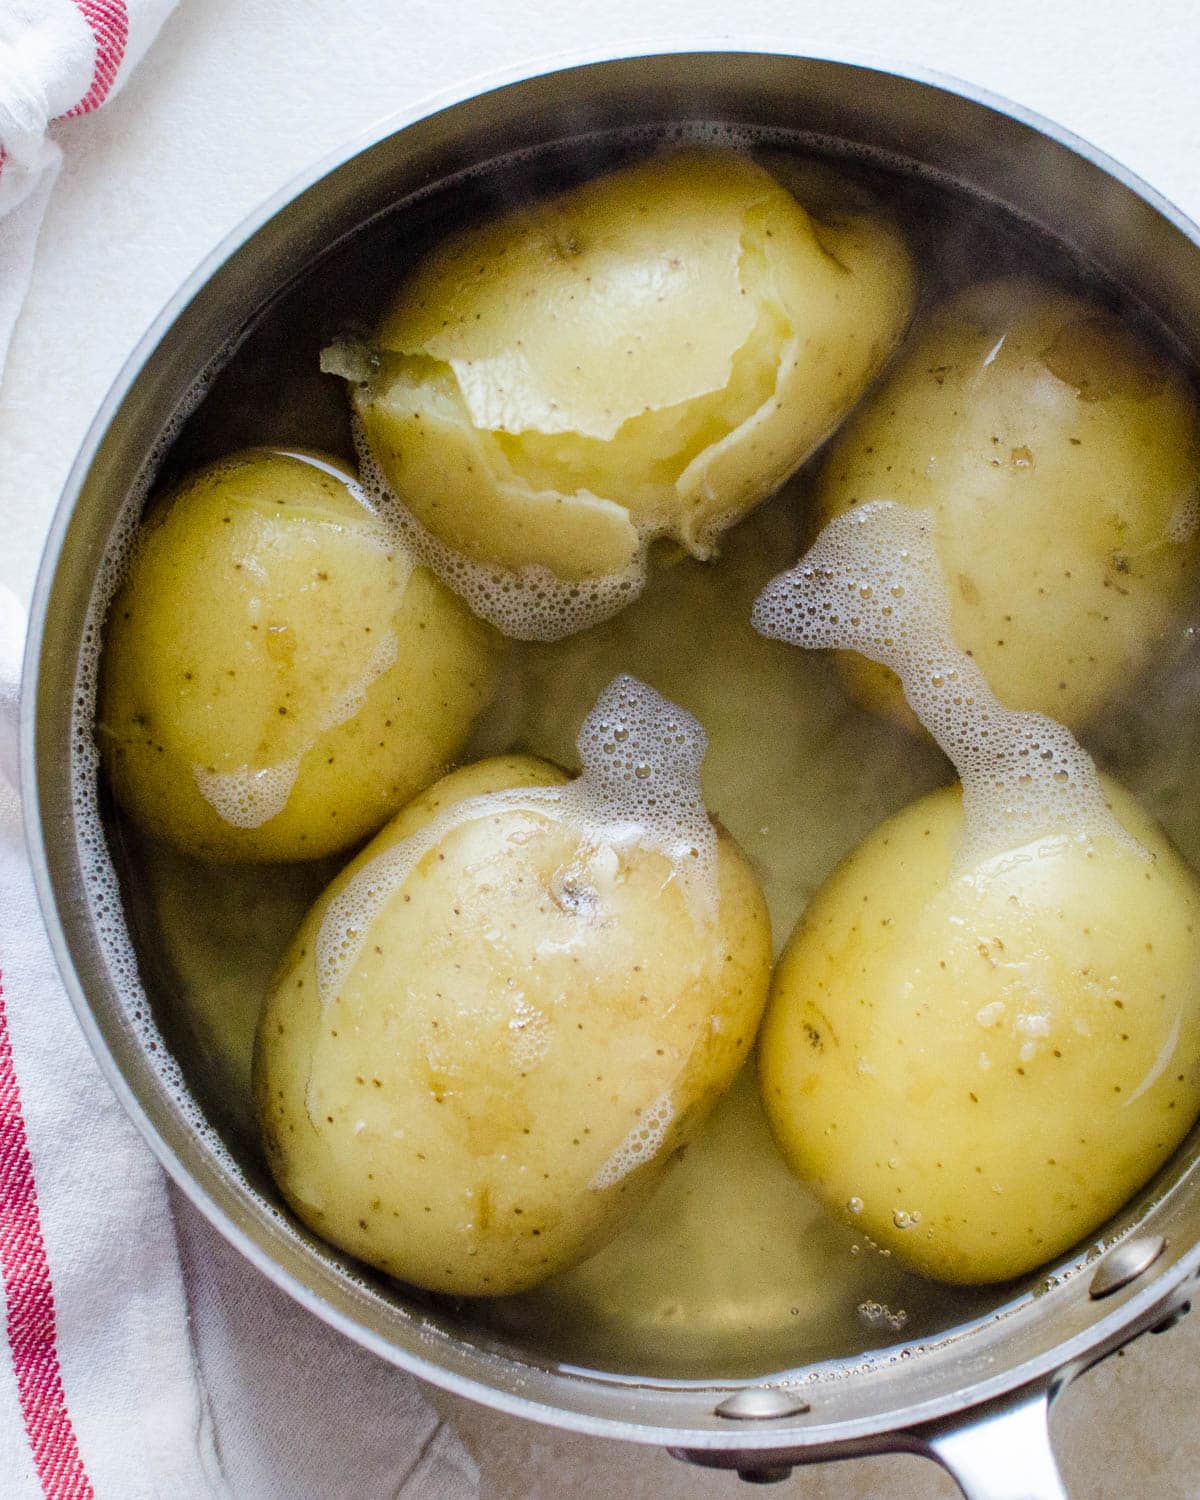 Whole potatoes boiled in a pot.